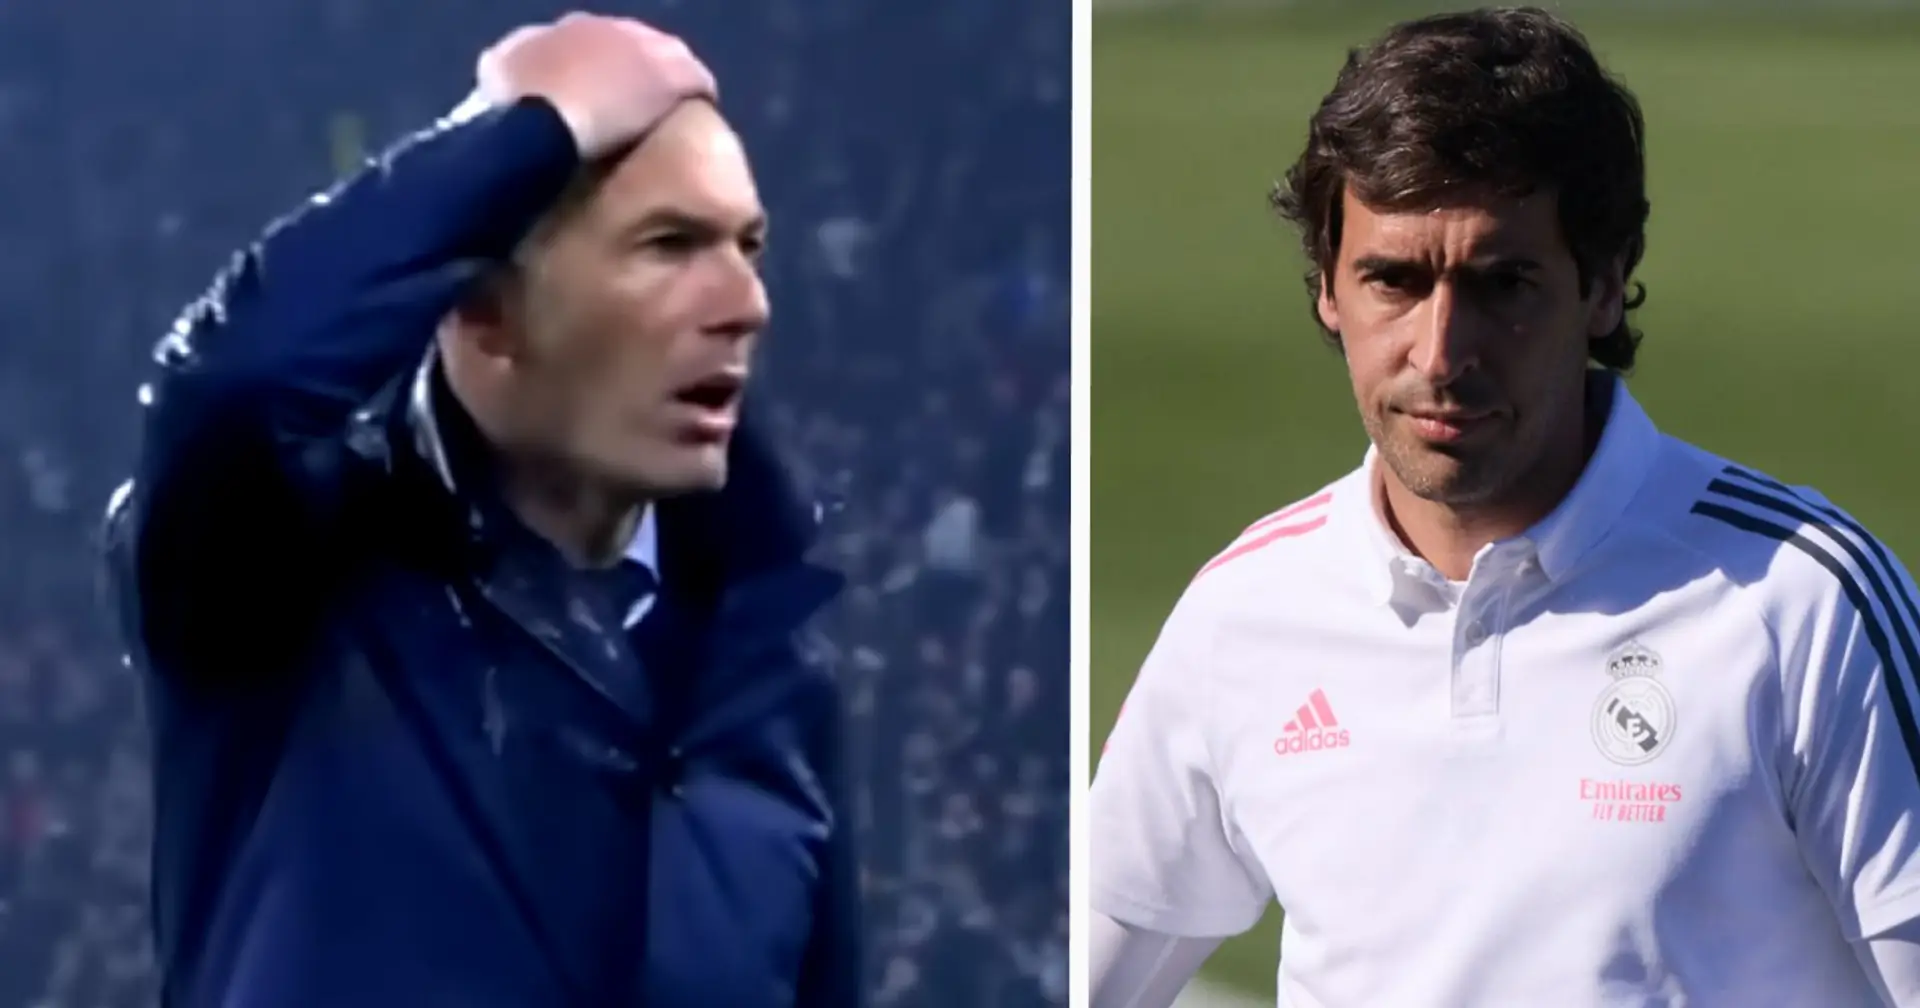 'Raul is plan B': Top source names Real Madrid's next coach, not Zidane